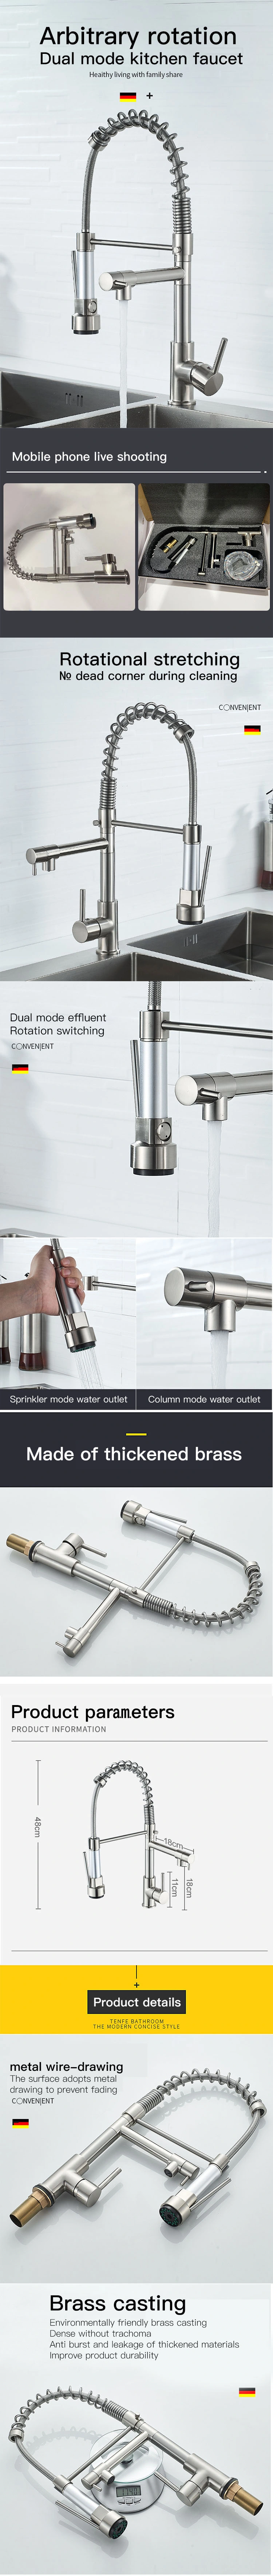 Commercial Pull Down Sprayer Brass High Quality Mixer Kitchen Faucet